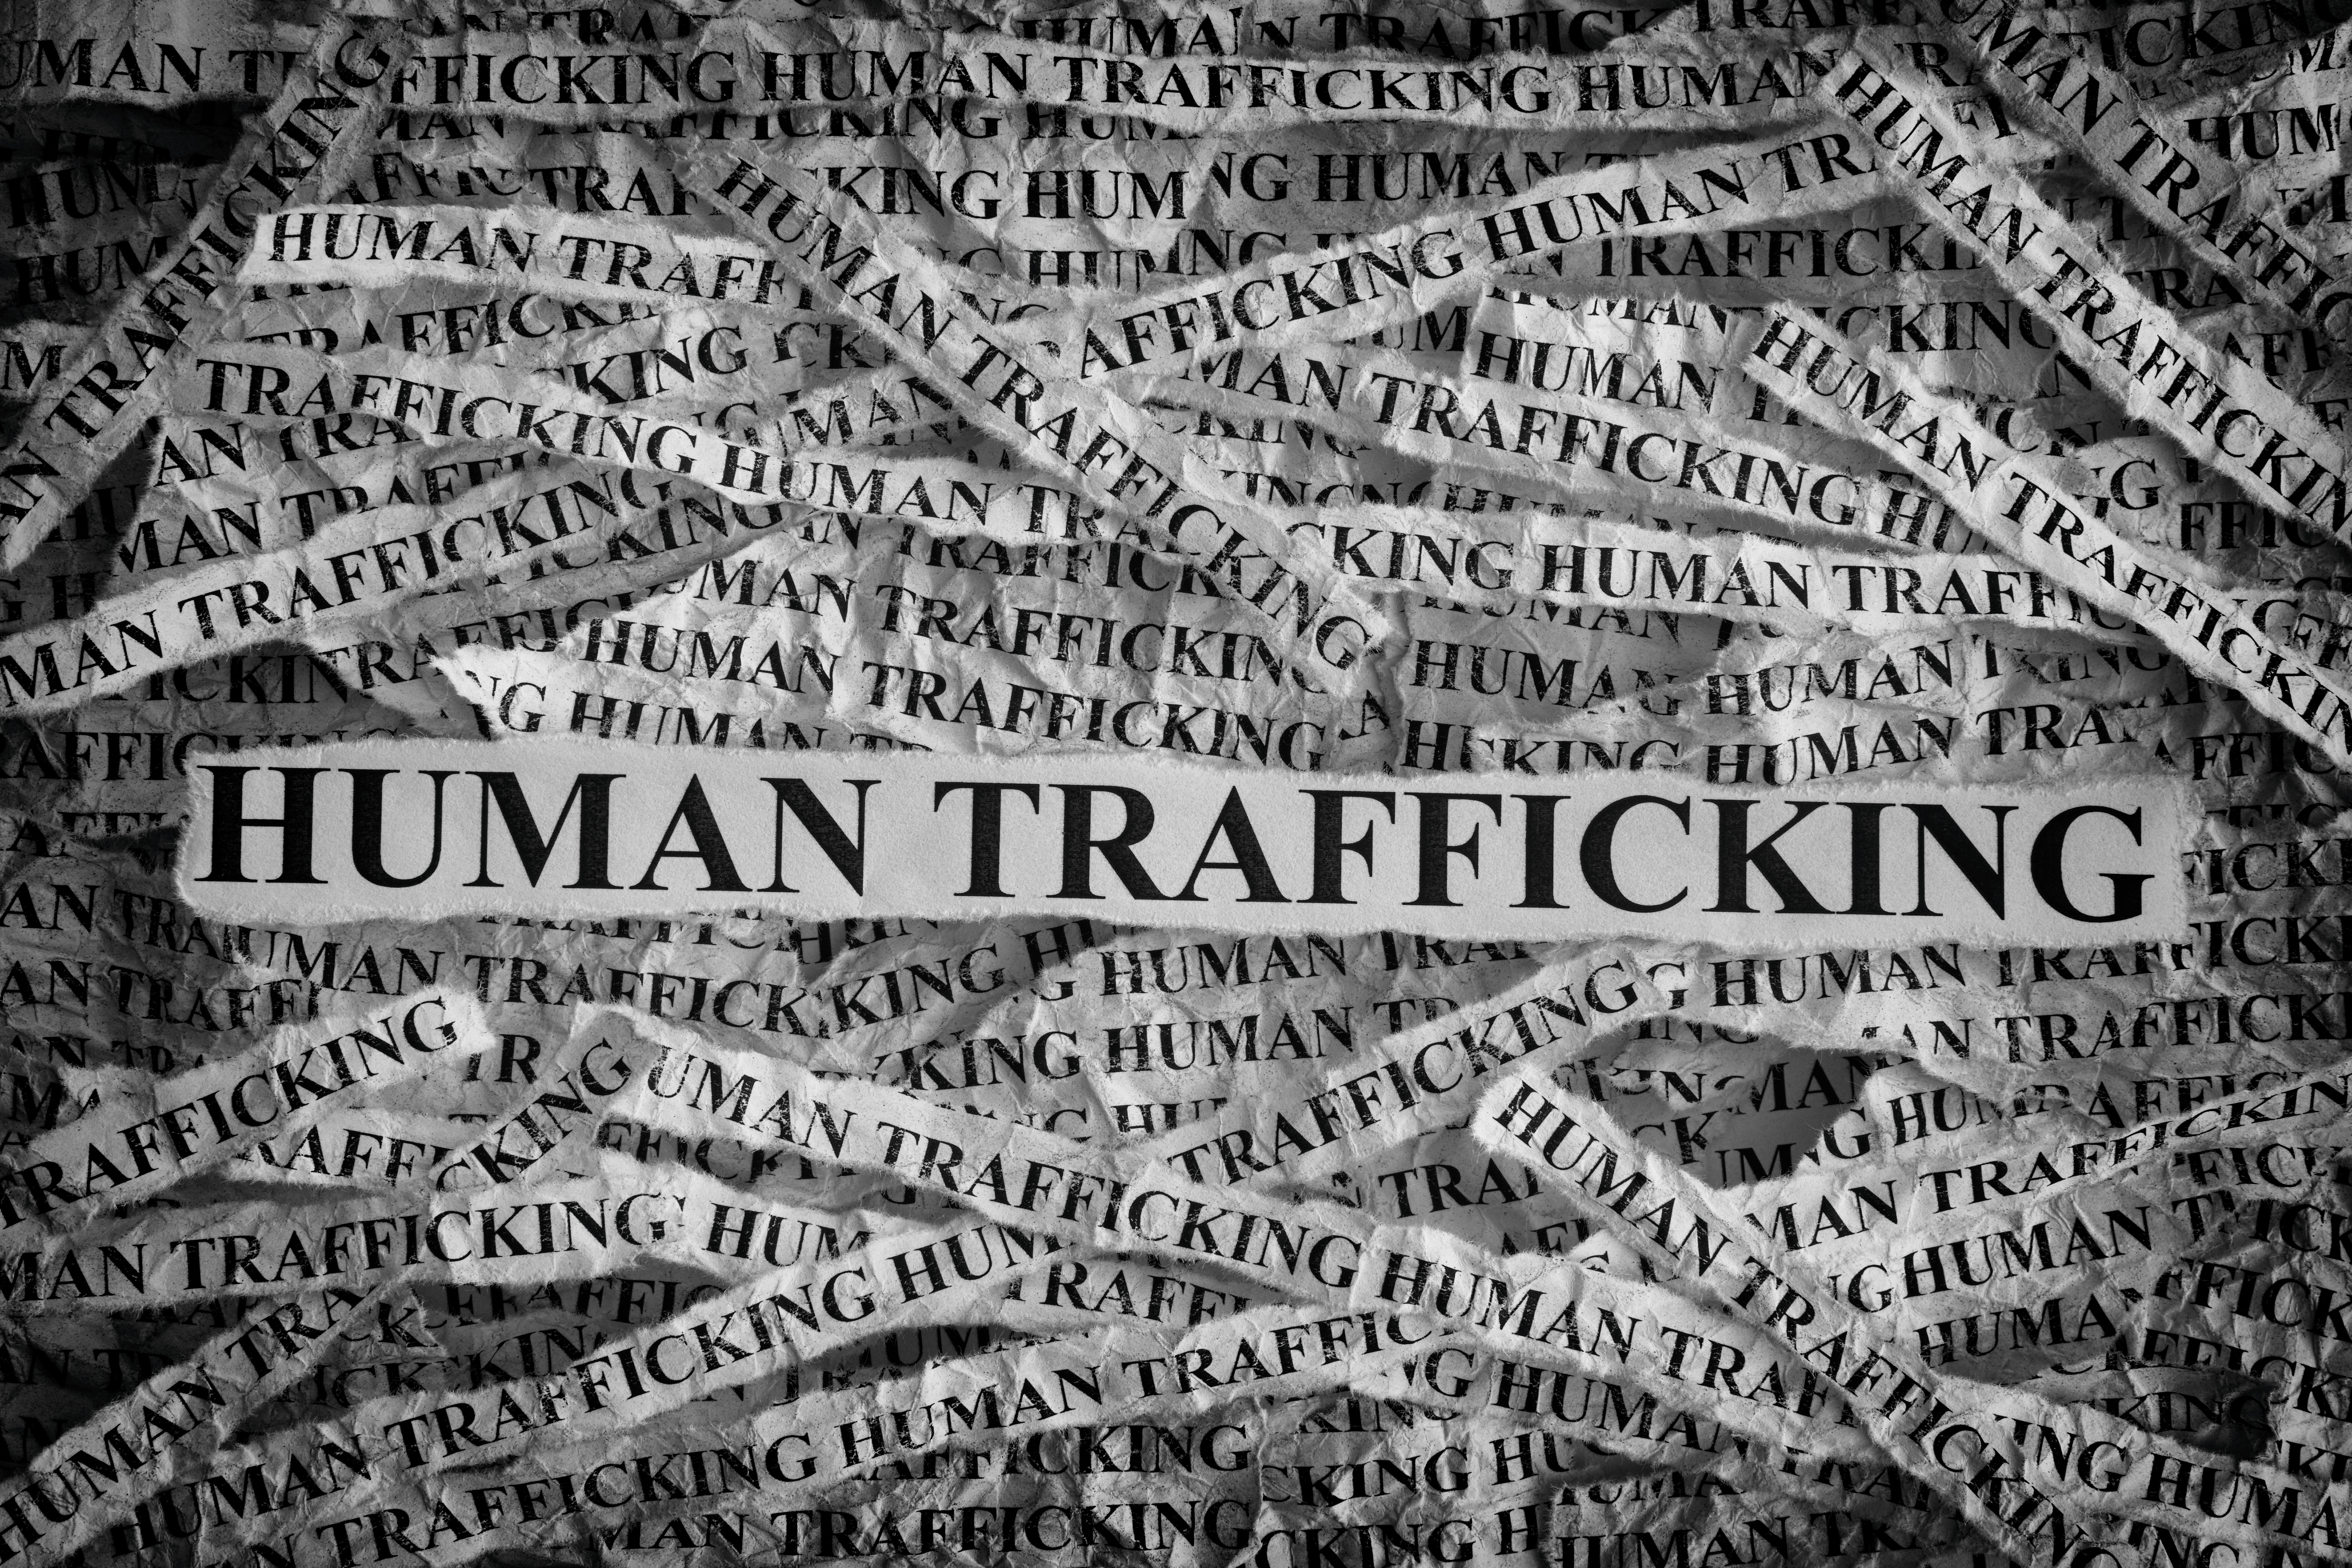 The case of 'John of God' - Sex Trafficking and Baby Farming